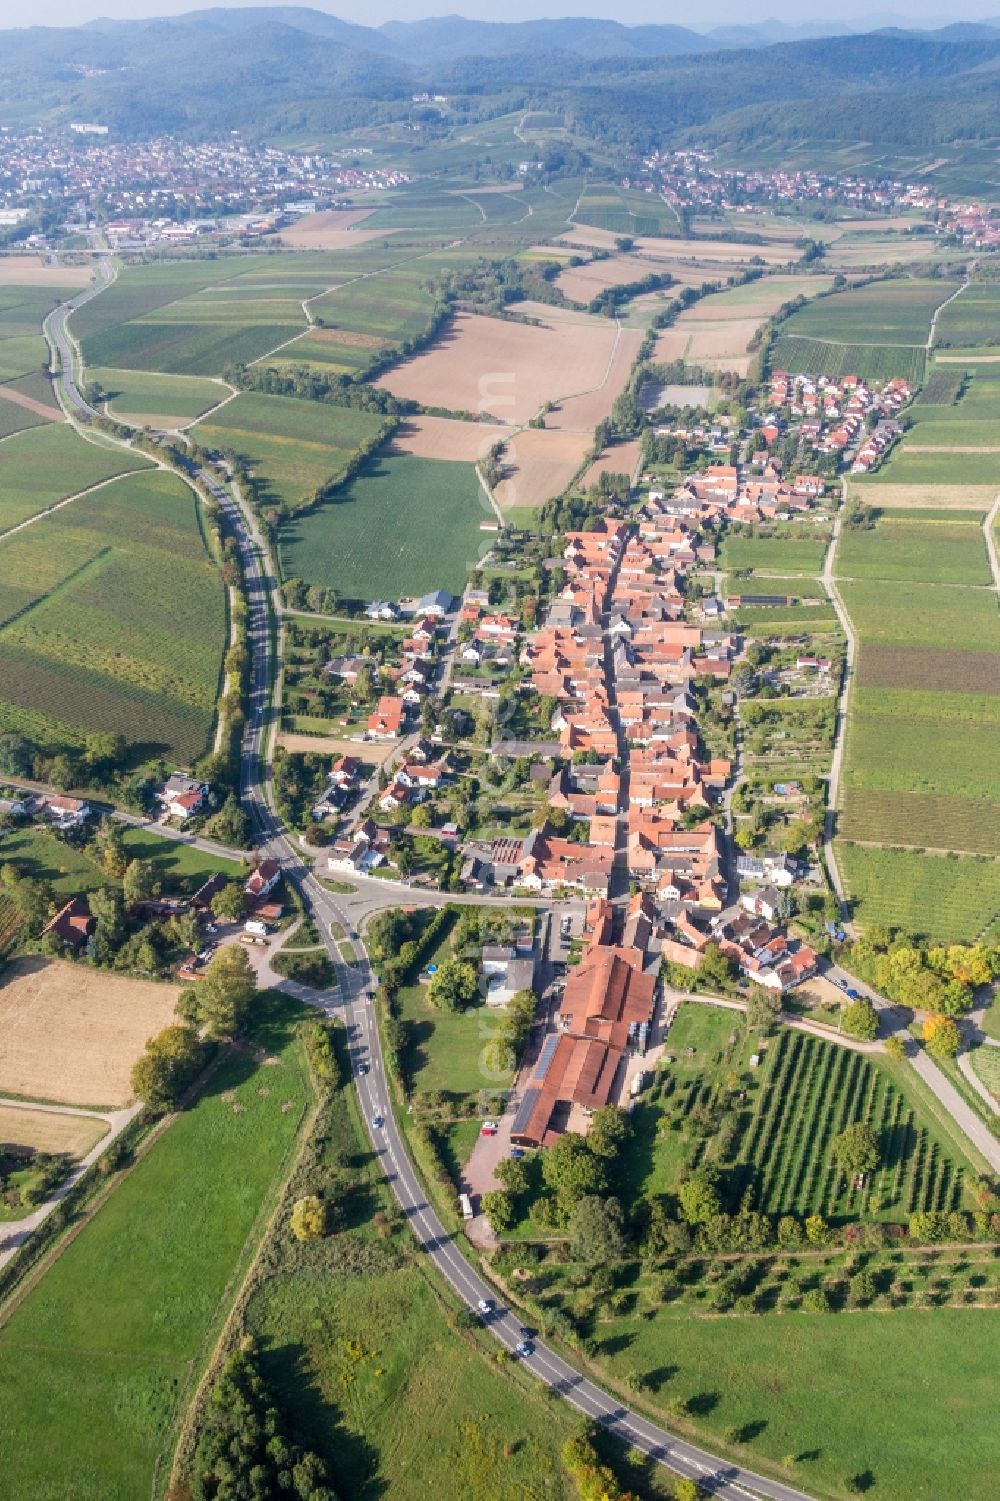 Aerial image Niederhorbach - Village - view on the edge of agricultural fields and farmland in Niederhorbach in the state Rhineland-Palatinate, Germany